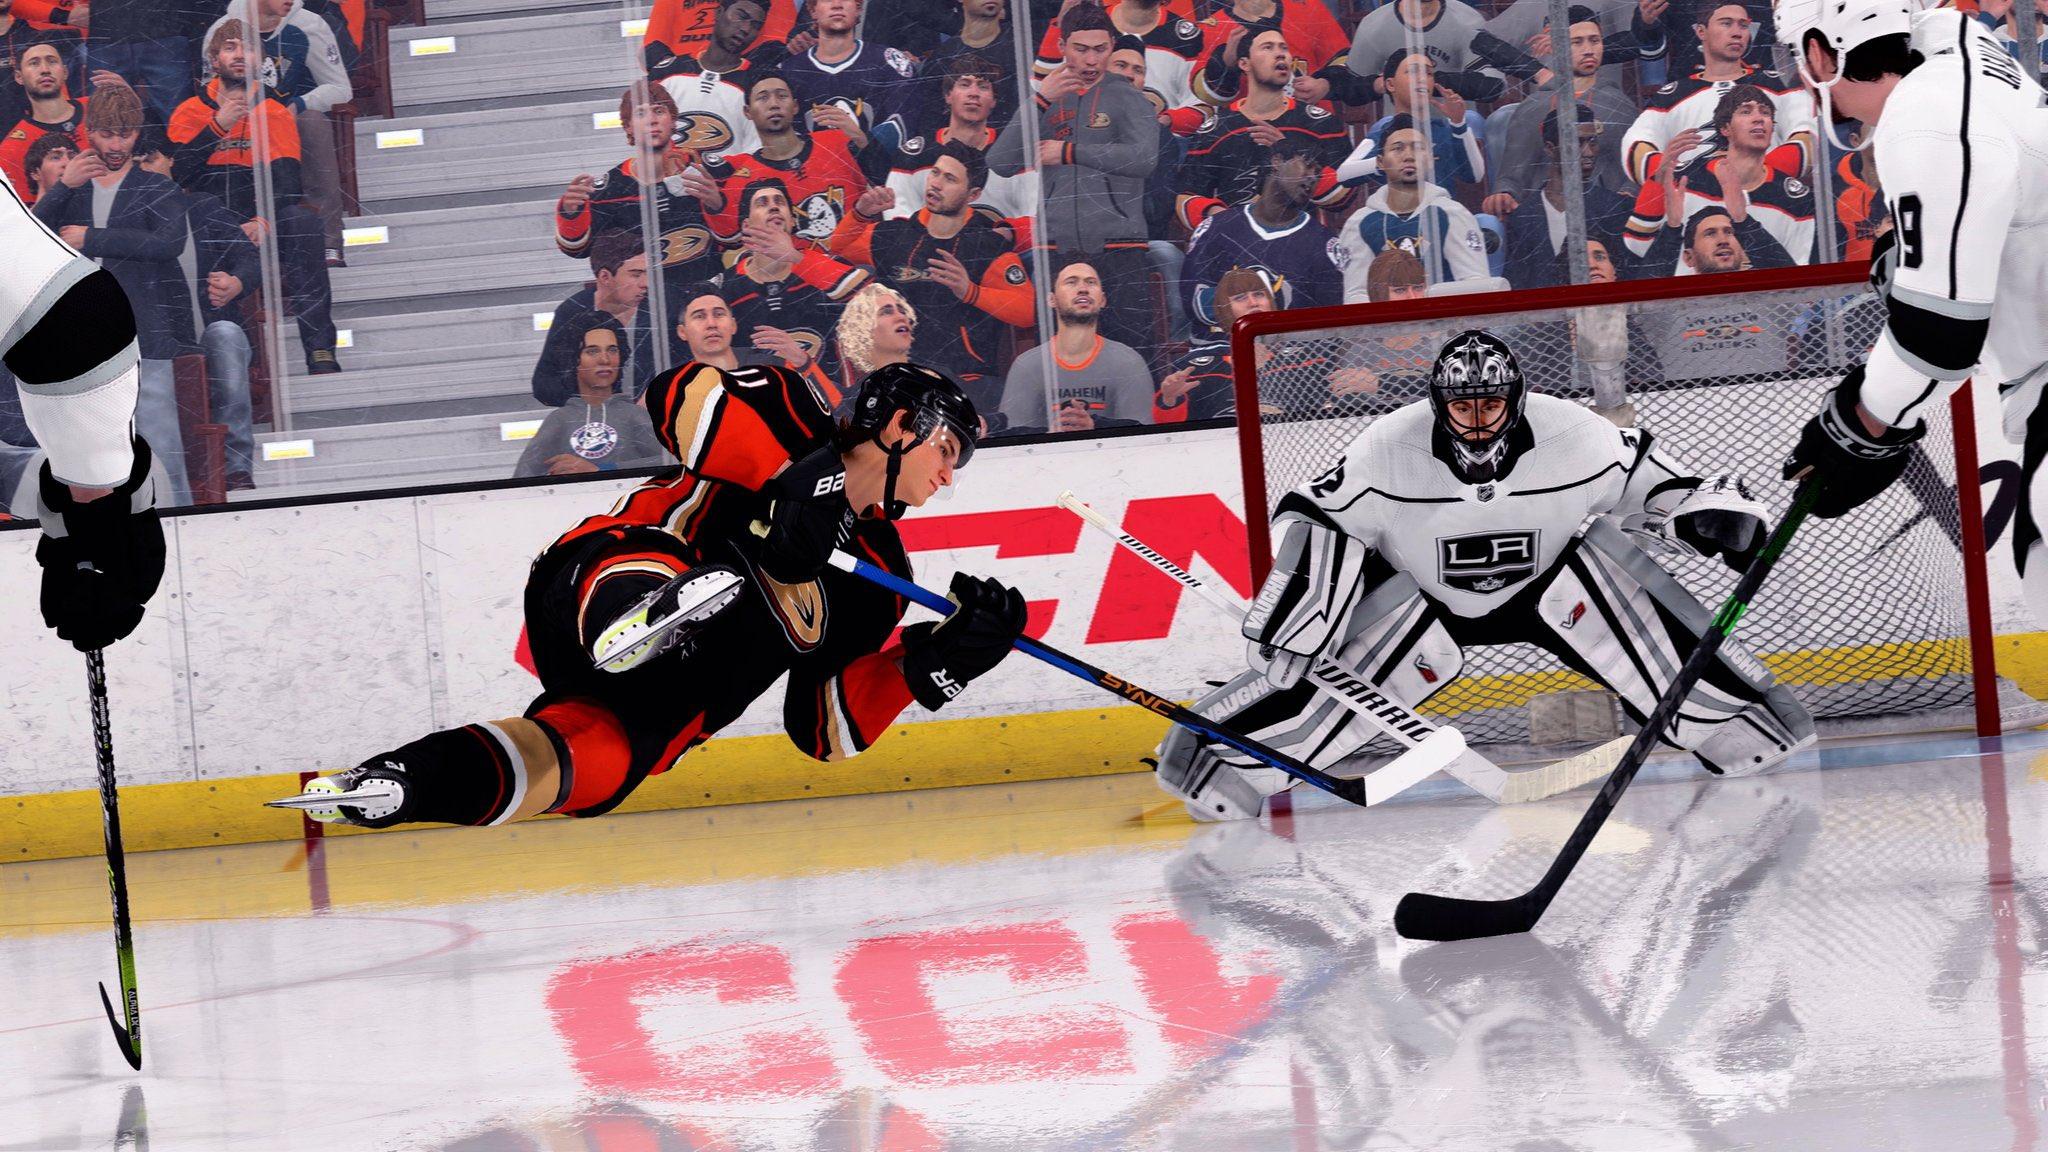 How Nurse and Zegras' EA Sports NHL 23 cover represents bright future of  hockey